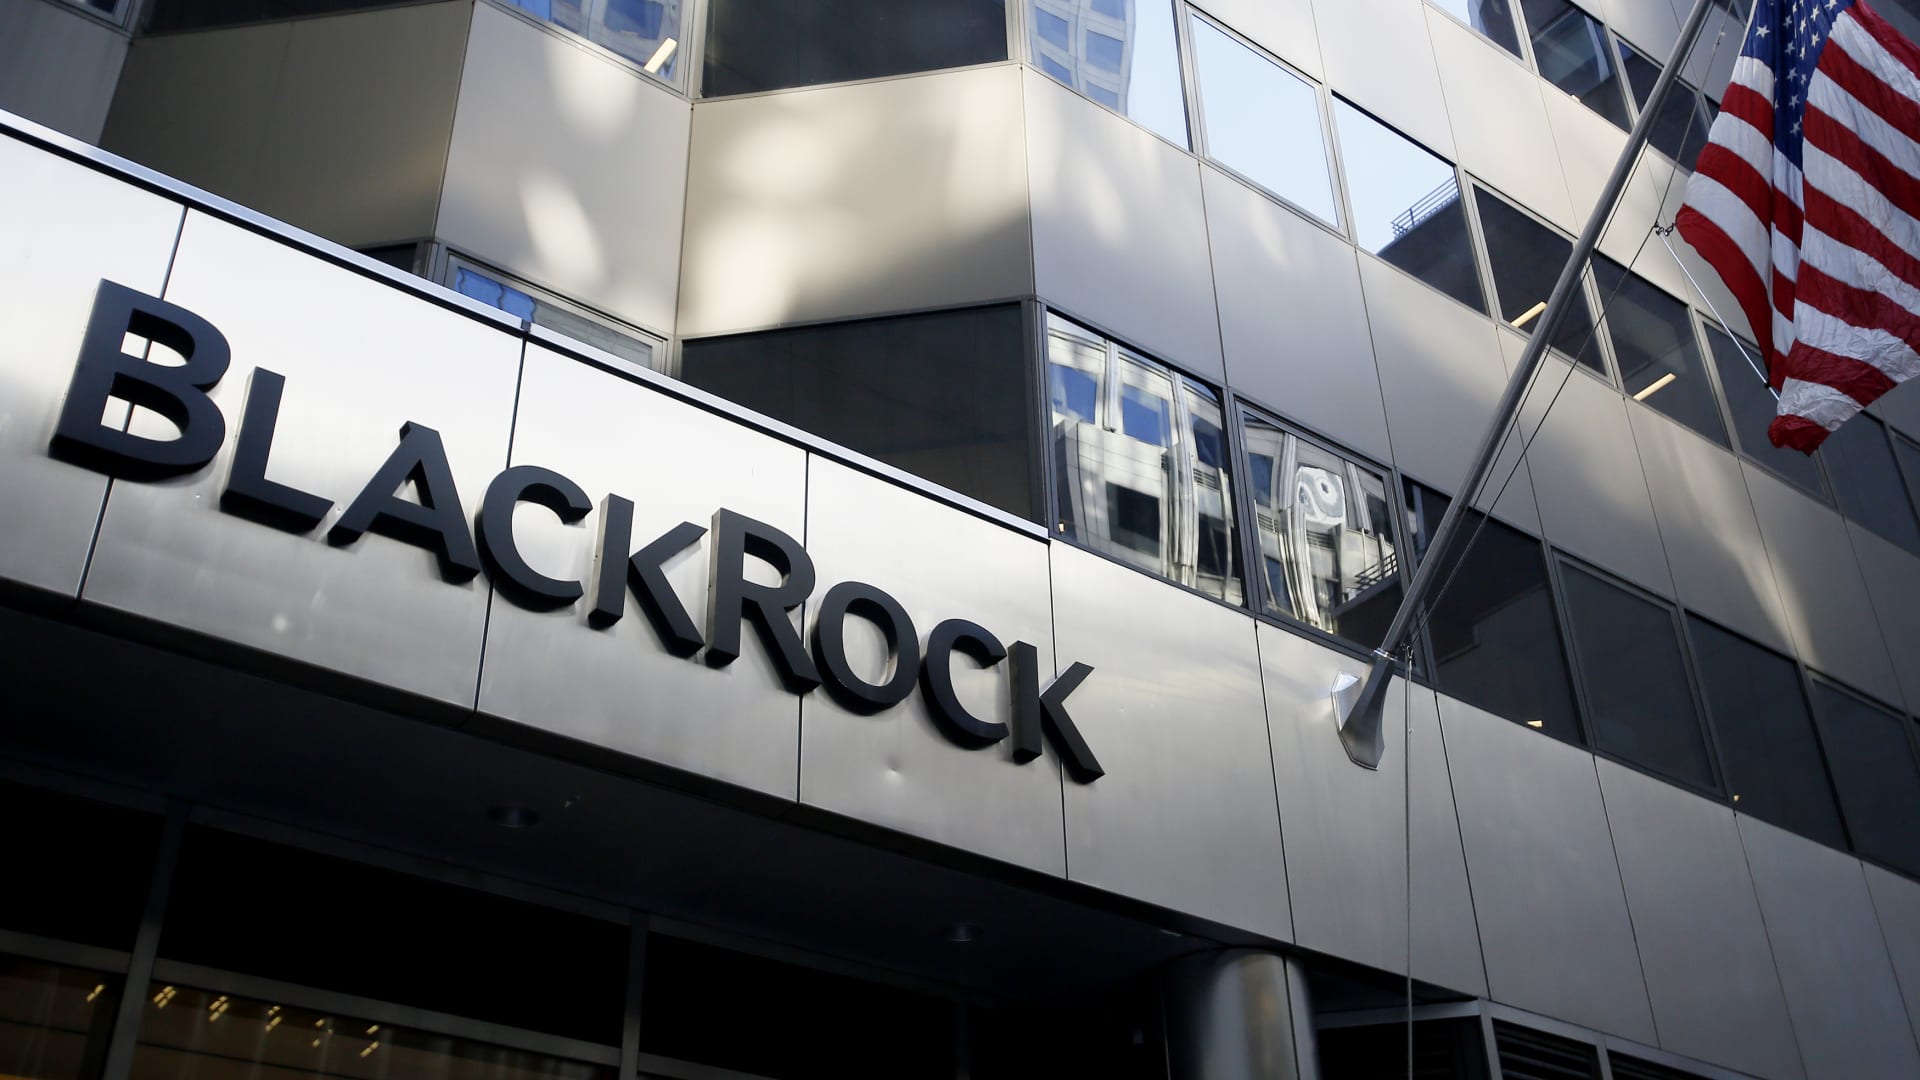 The BlackRock logo is displayed at the company's headquarters in New York City on Nov. 14, 2022.